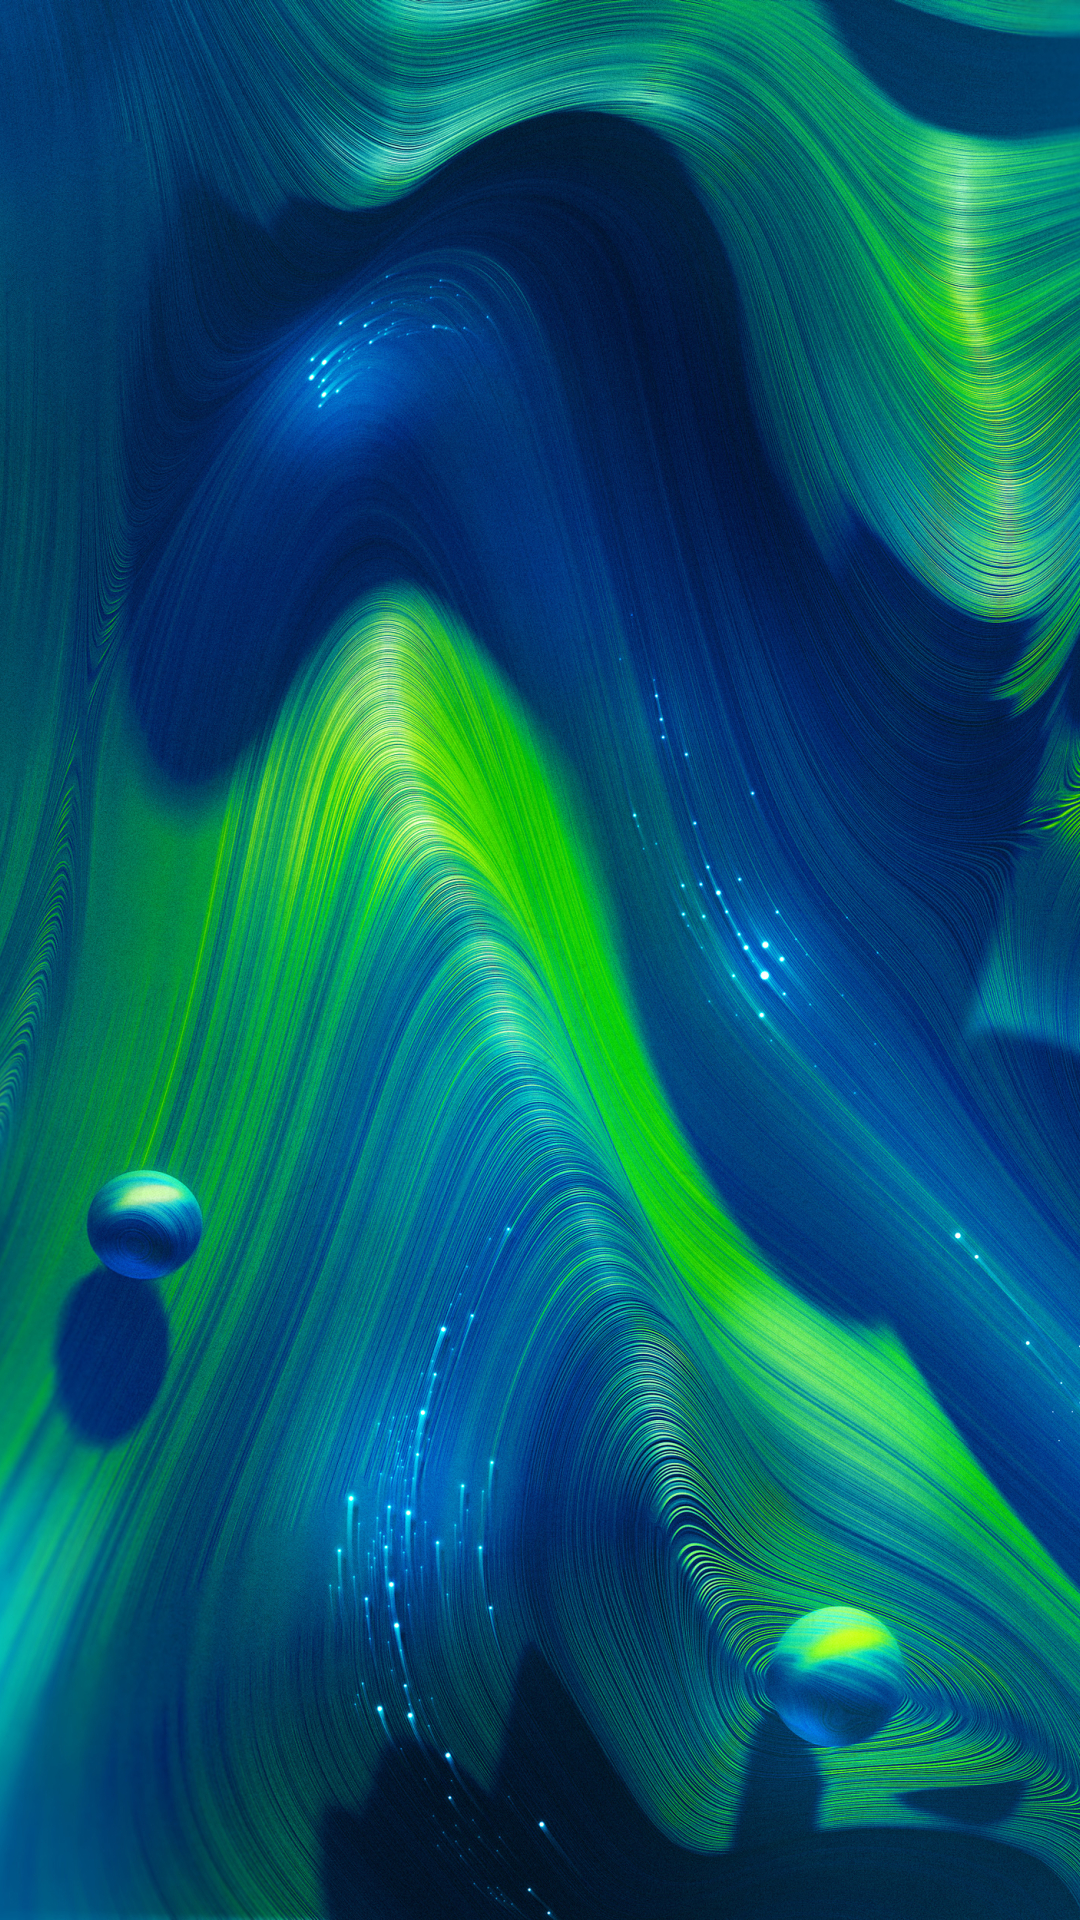 1080x1920 Abstract Fluid Texture Iphone 7, 6s, 6 Plus and Pixel XL ,One Plus 3, 3t, 5 Wallpaper ...